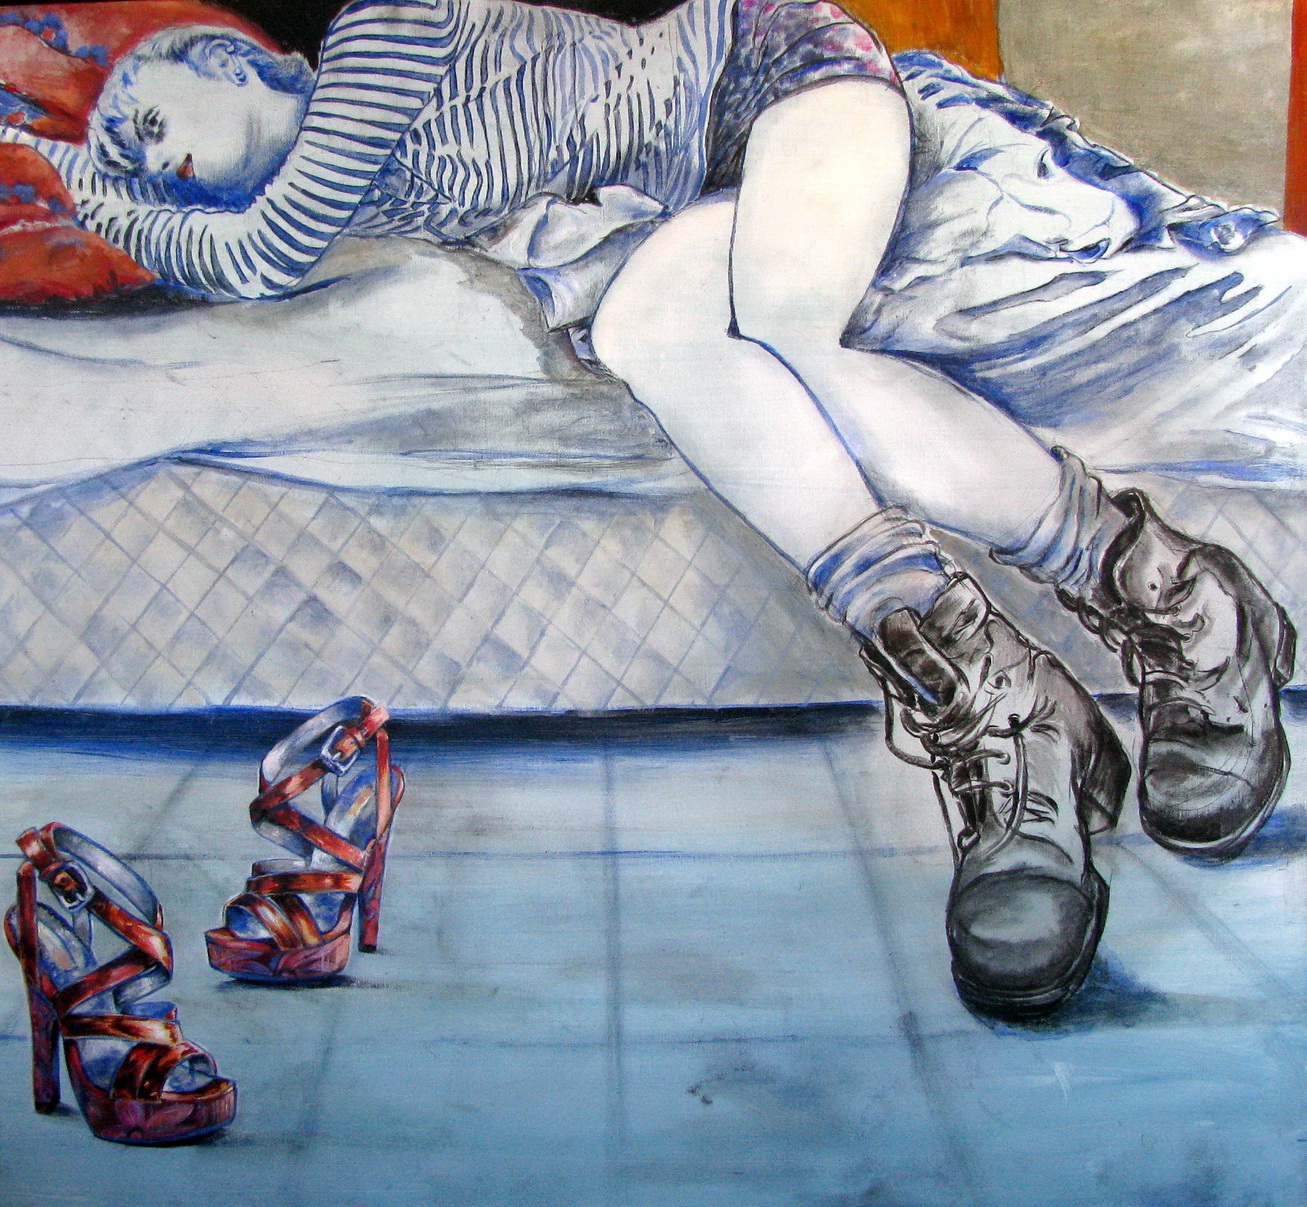 New Shoes 80x90cm Oil on canvas 1